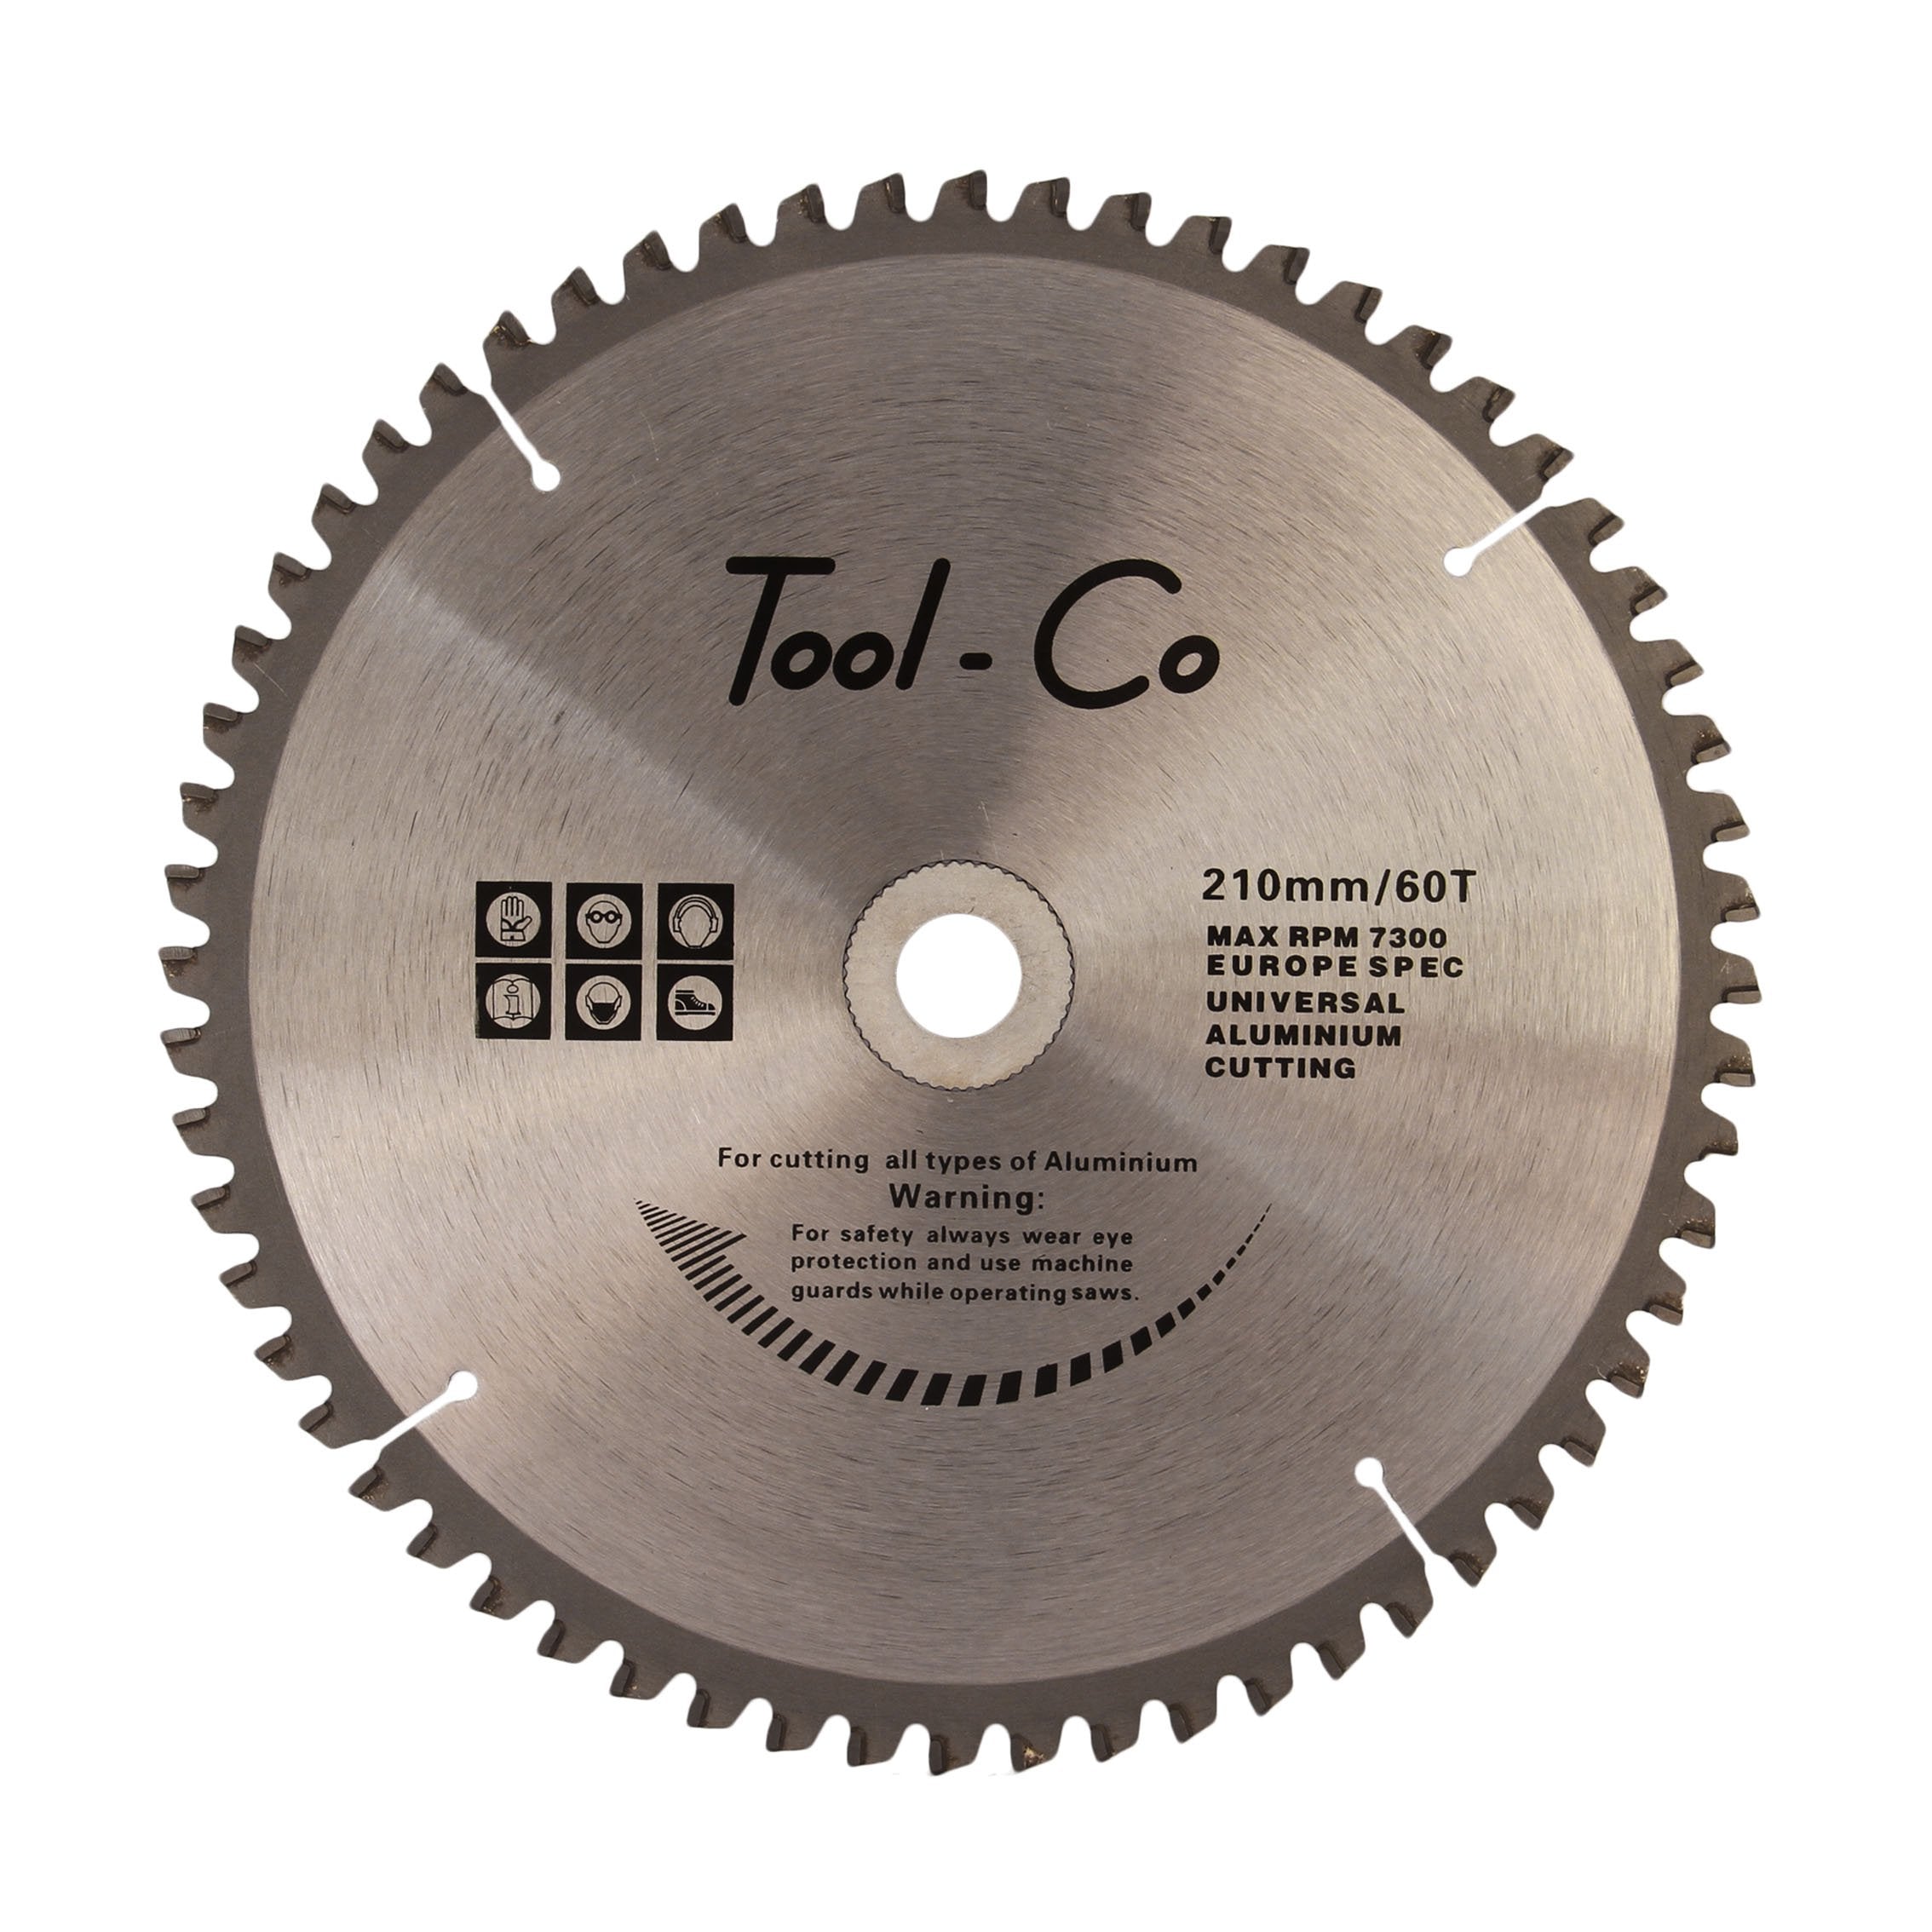 Tool-Co Circular Saw Blades For Aluminium 210mm 60t BX21060A Power Tool Services